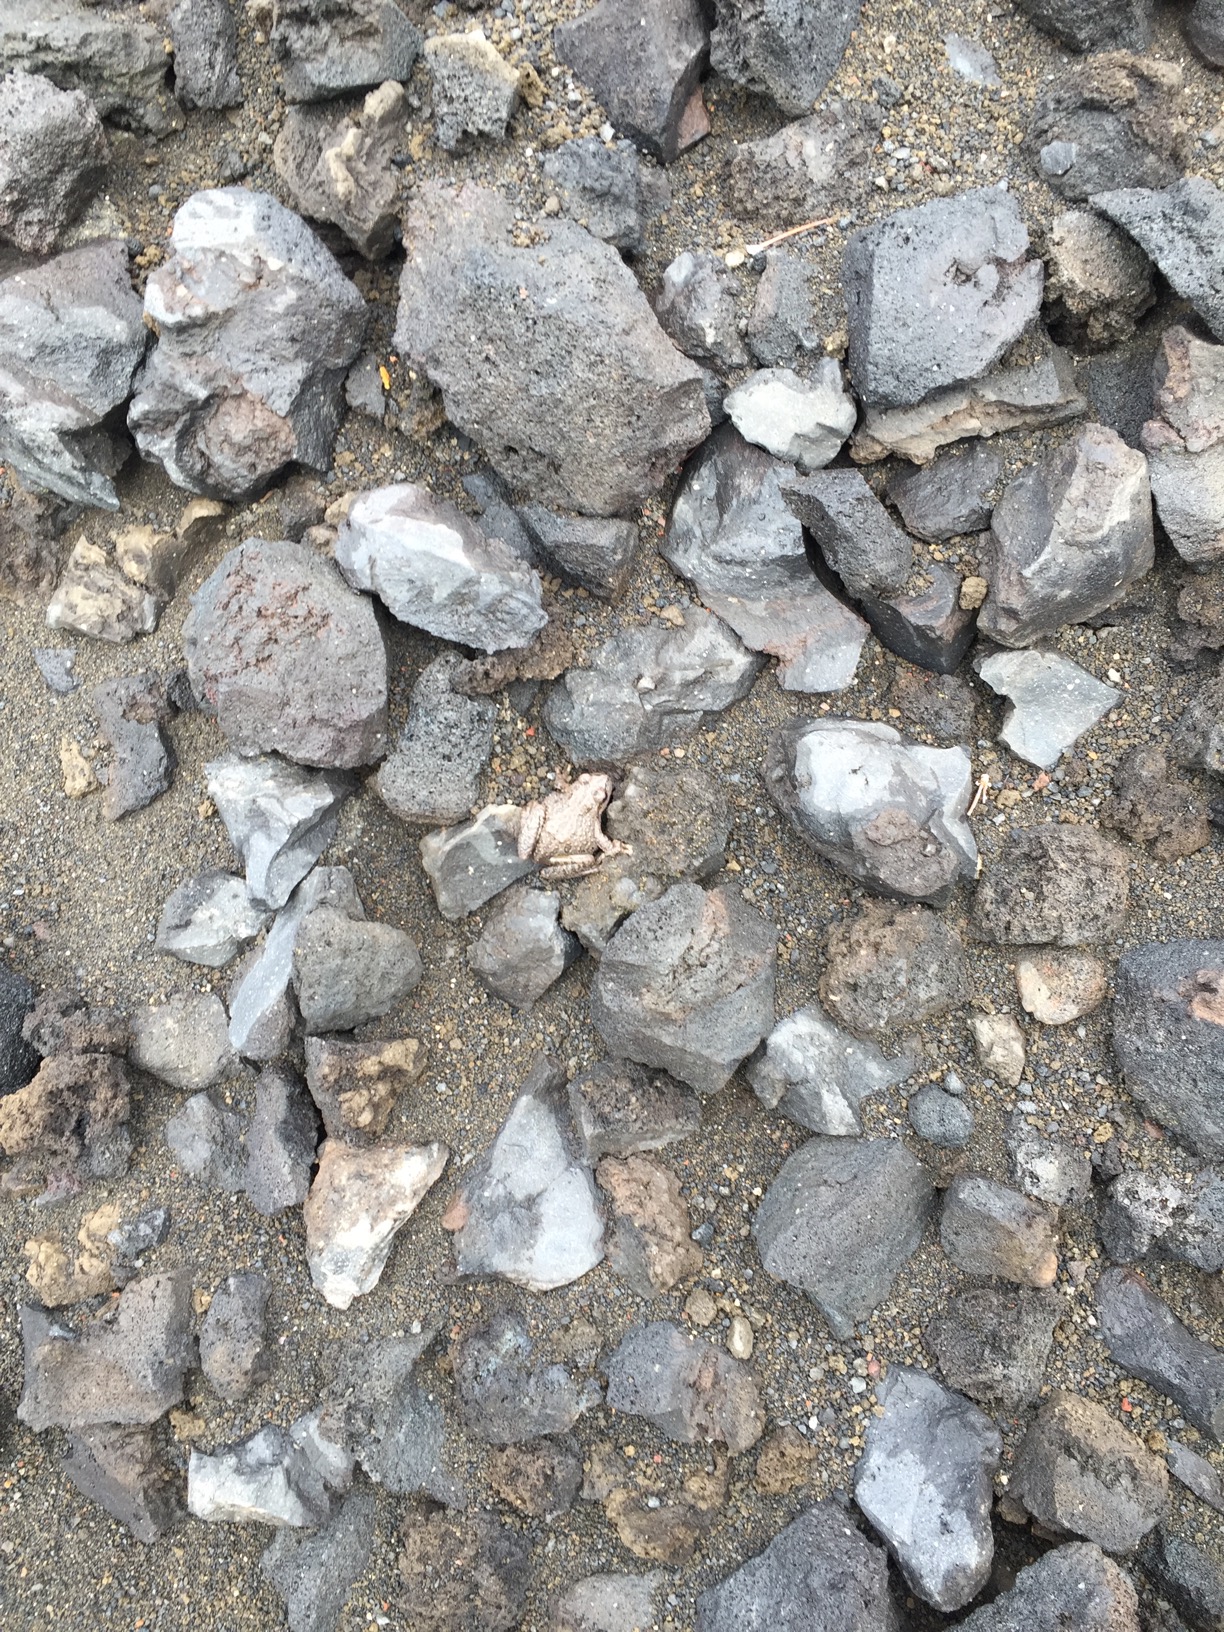 A toad blends in with brown and gray volcanic rock